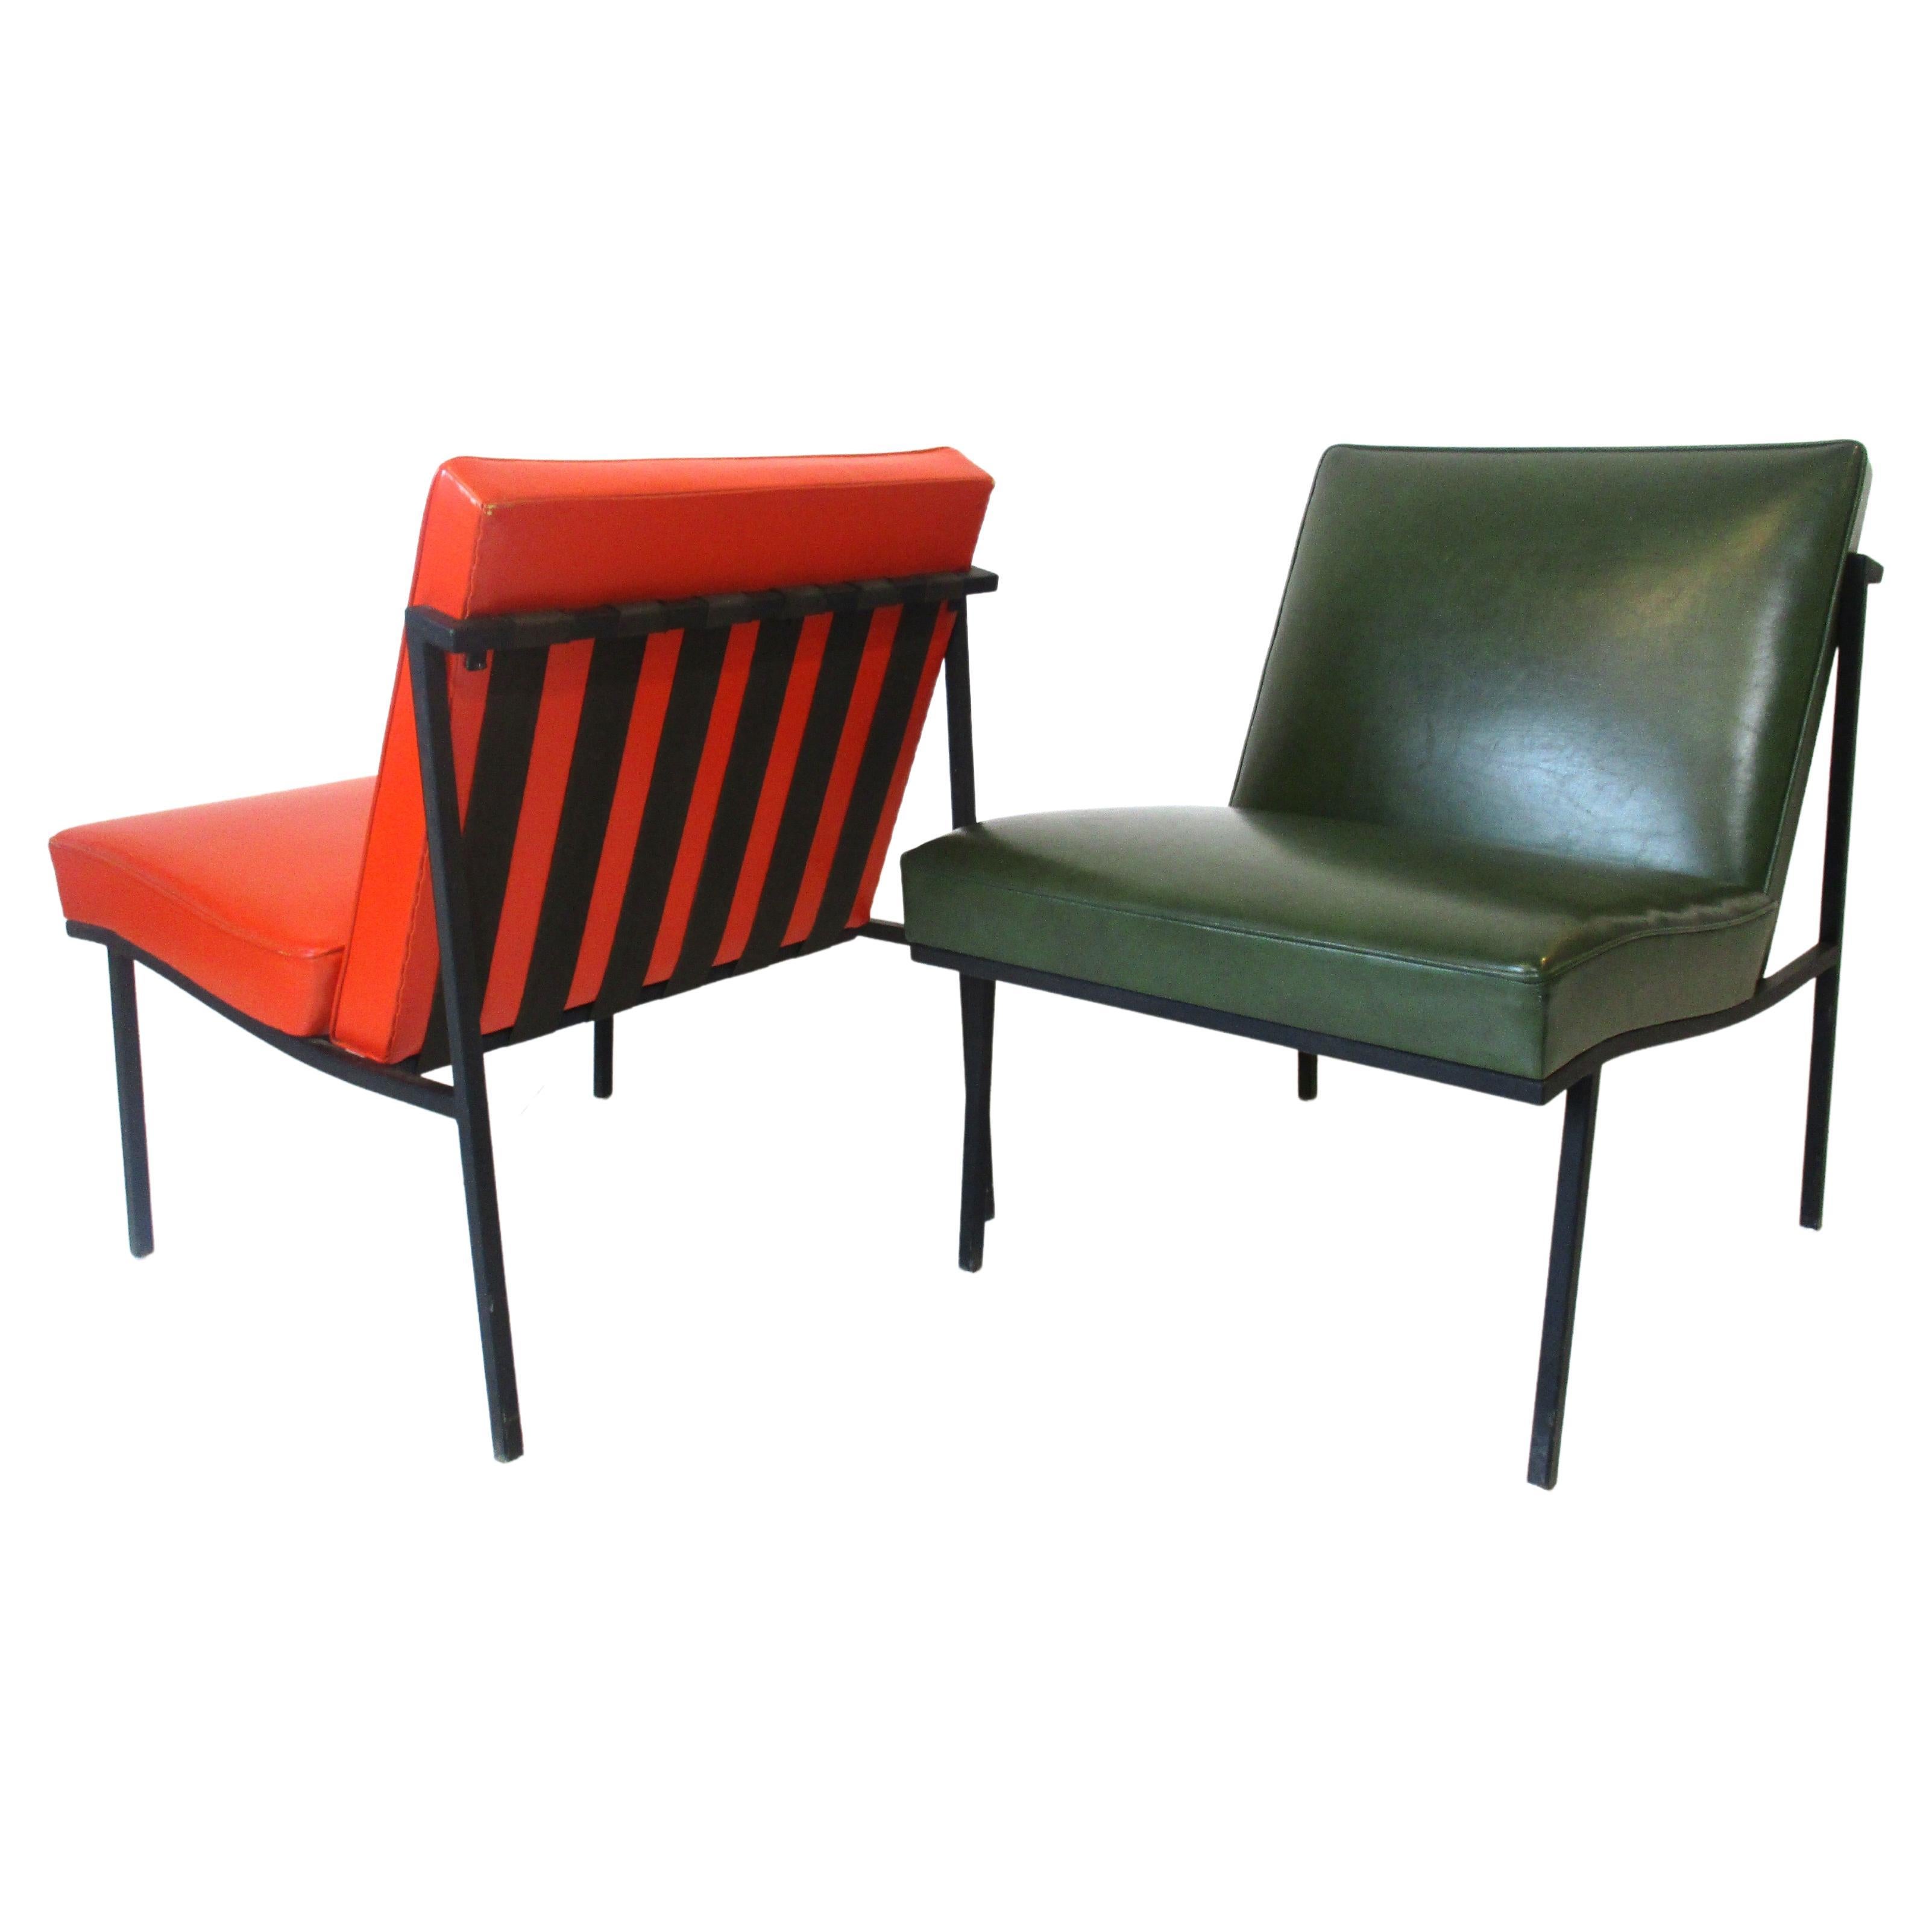 Rare William Armbruster Lounge Chairs MOMA Good Design for Edgewood Co. 